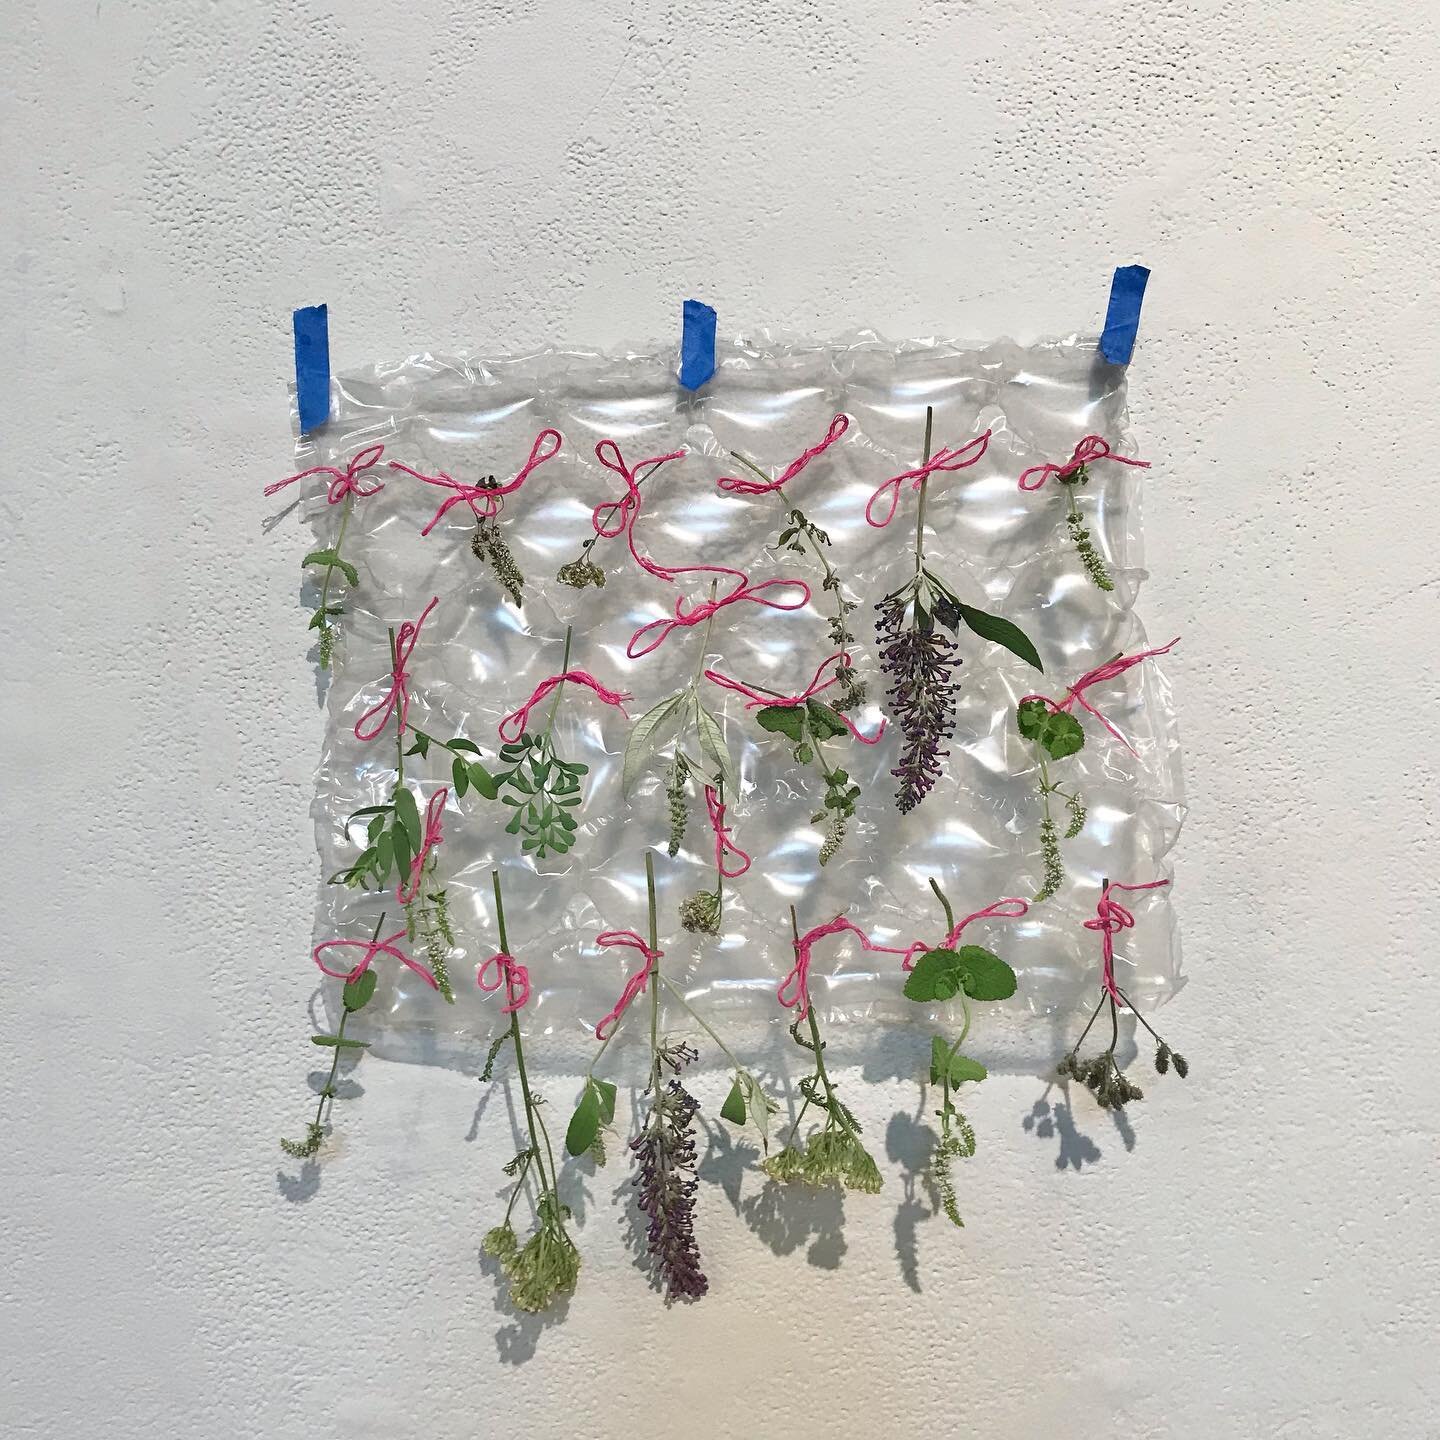 Another snapshot from embroidery class, made this while I had my students work with found objects/material. Flowers are from my garden 🌸🌸🌸